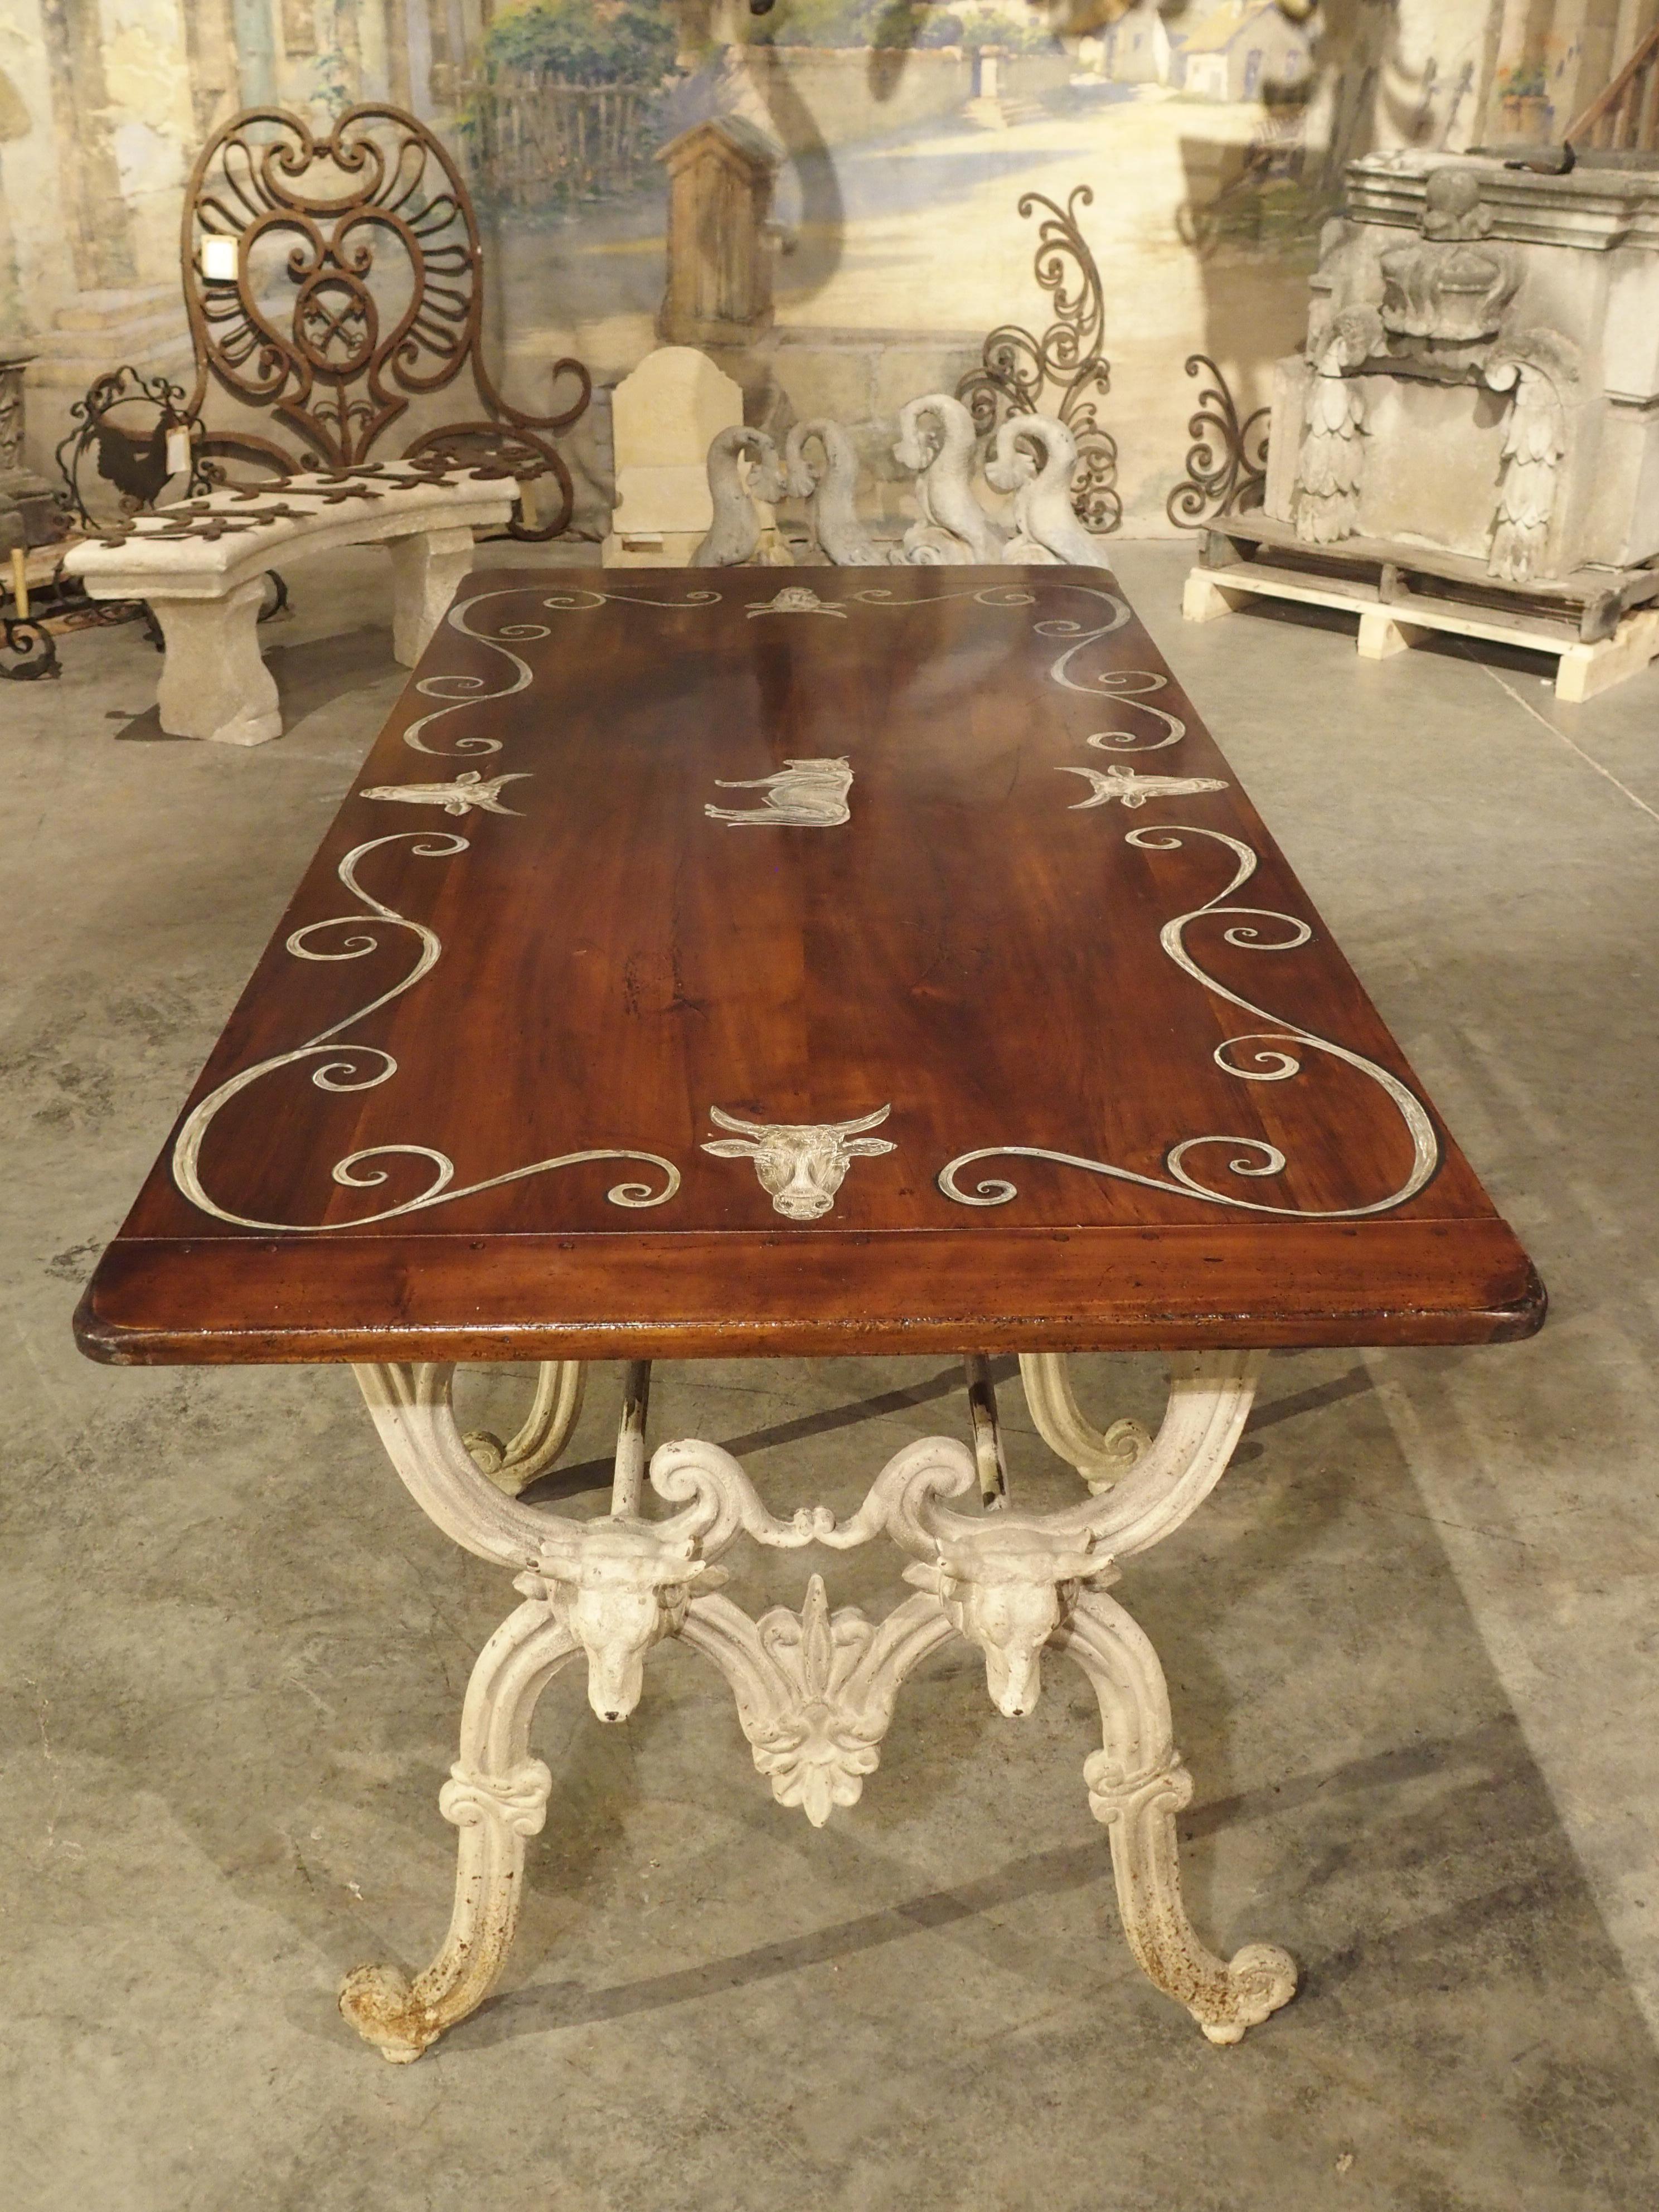 This amazing French table was originally used to display cuts of meat in a butcher shop. Butcher tables had marble tops, but this one has a wonderful wood top with painted bull heads, a big center bull, and scrollwork, all which match the color of